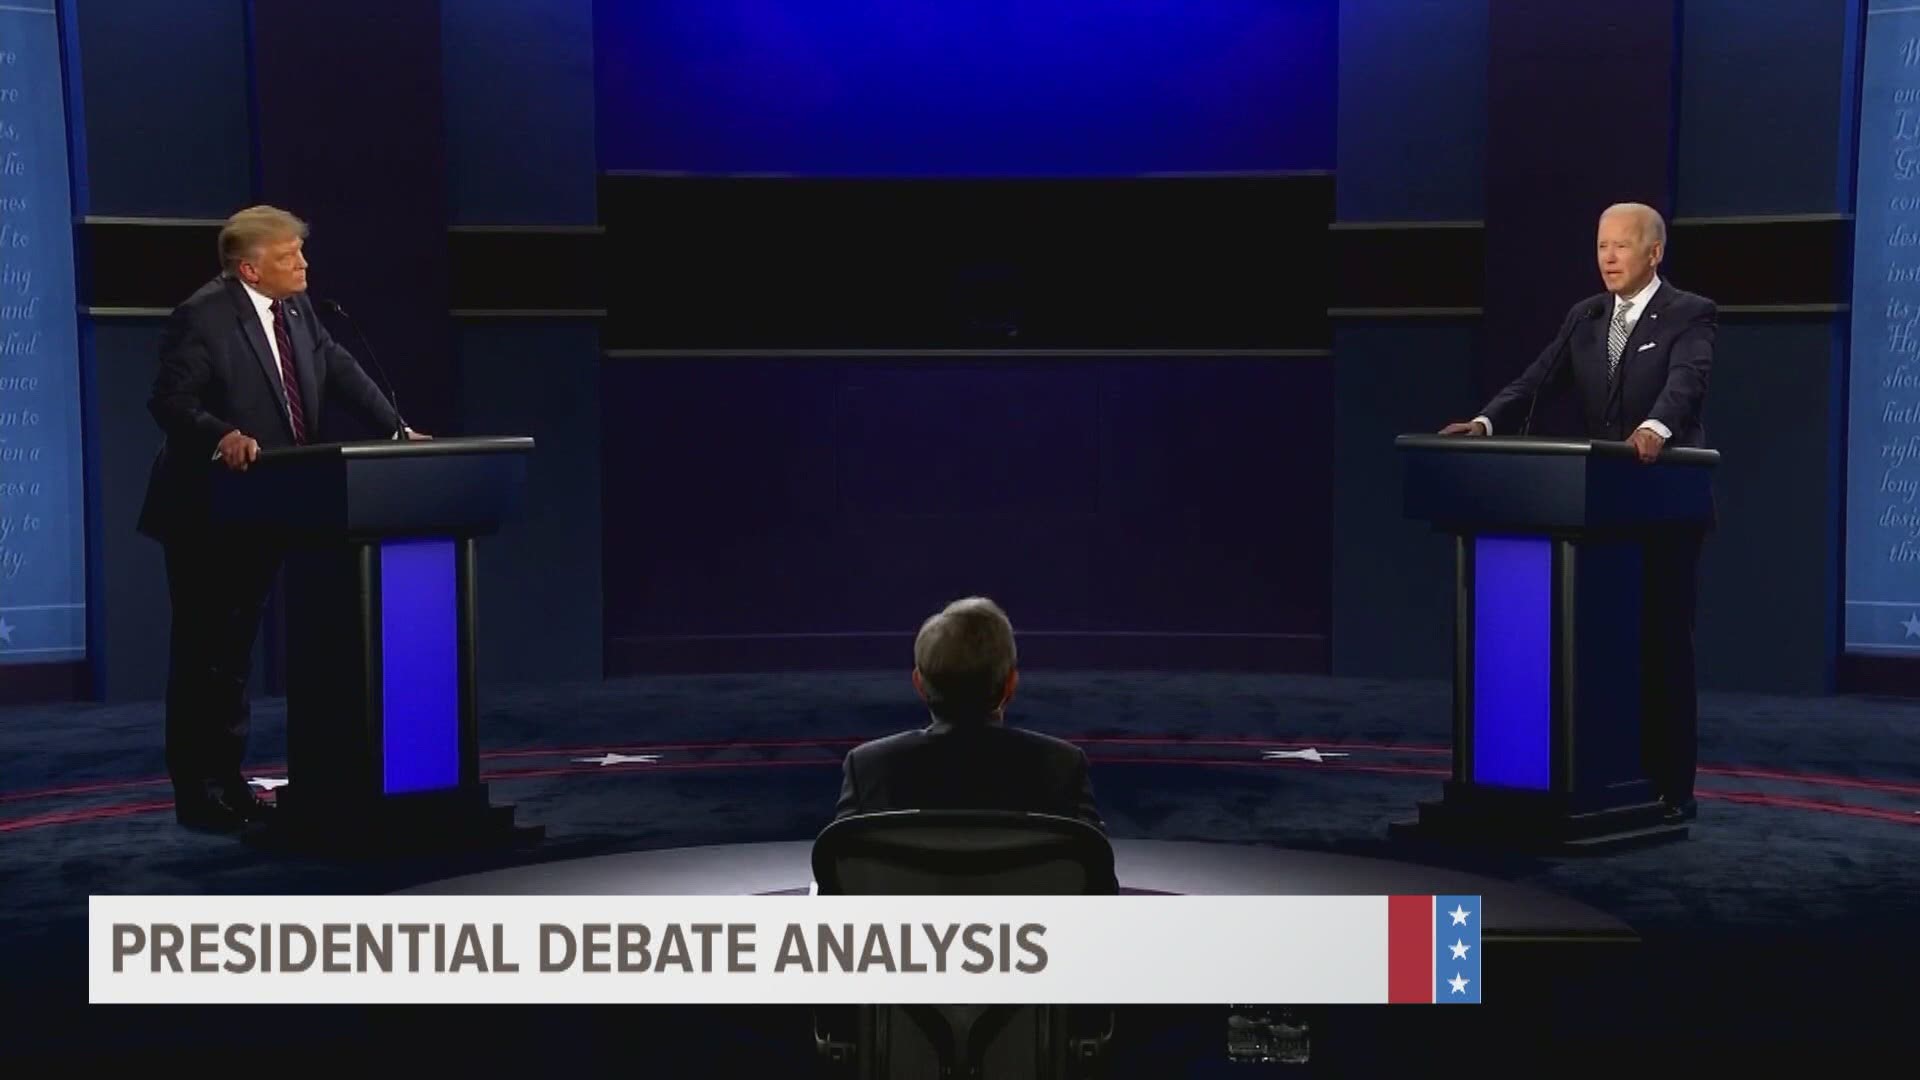 State Rep. Matt Schaefer (R-Tyler) and Gilberto Hinojosa, Chairman of the Texas Democratic Party, offer their analysis of the first presidential debate